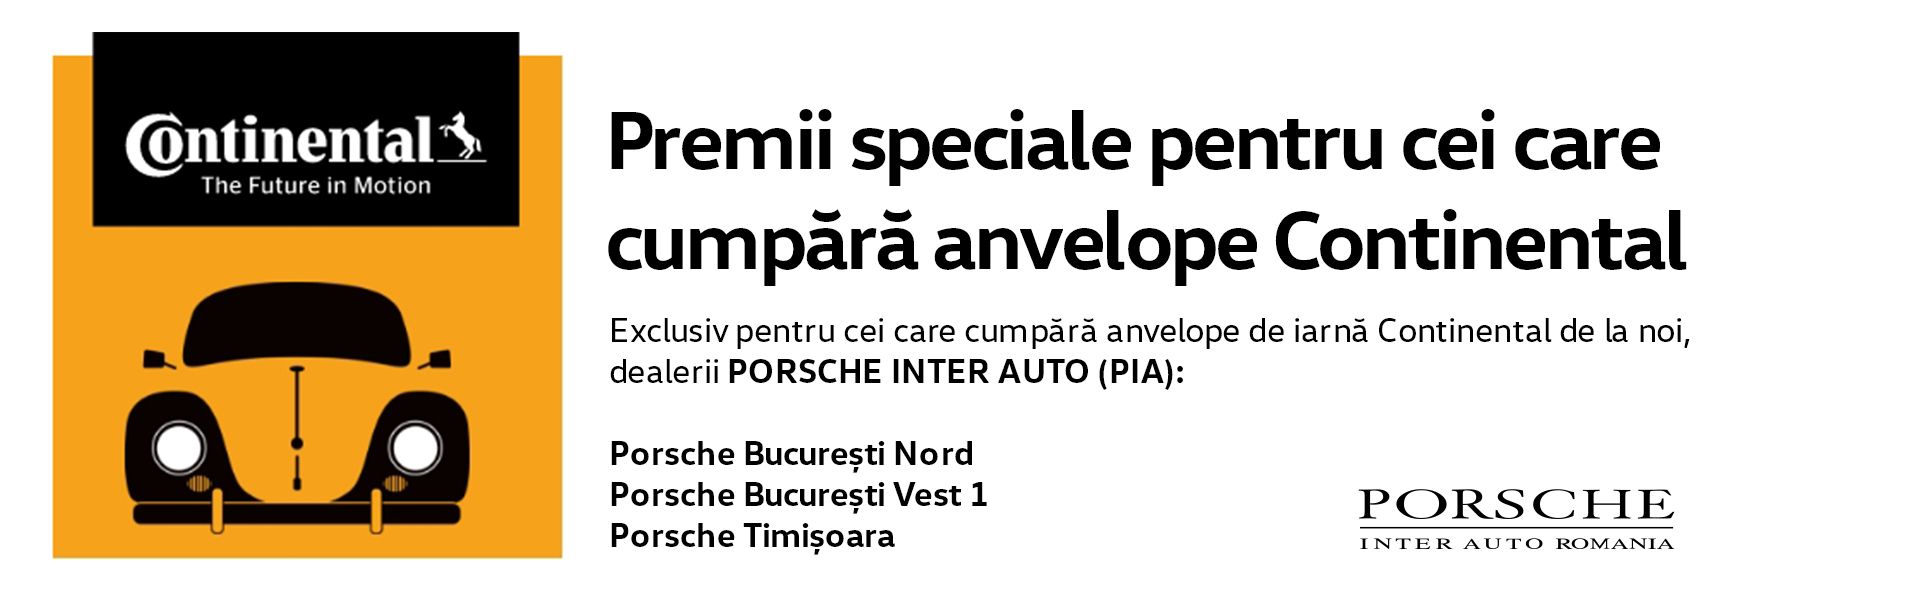 Premii speciale anvelope Continental